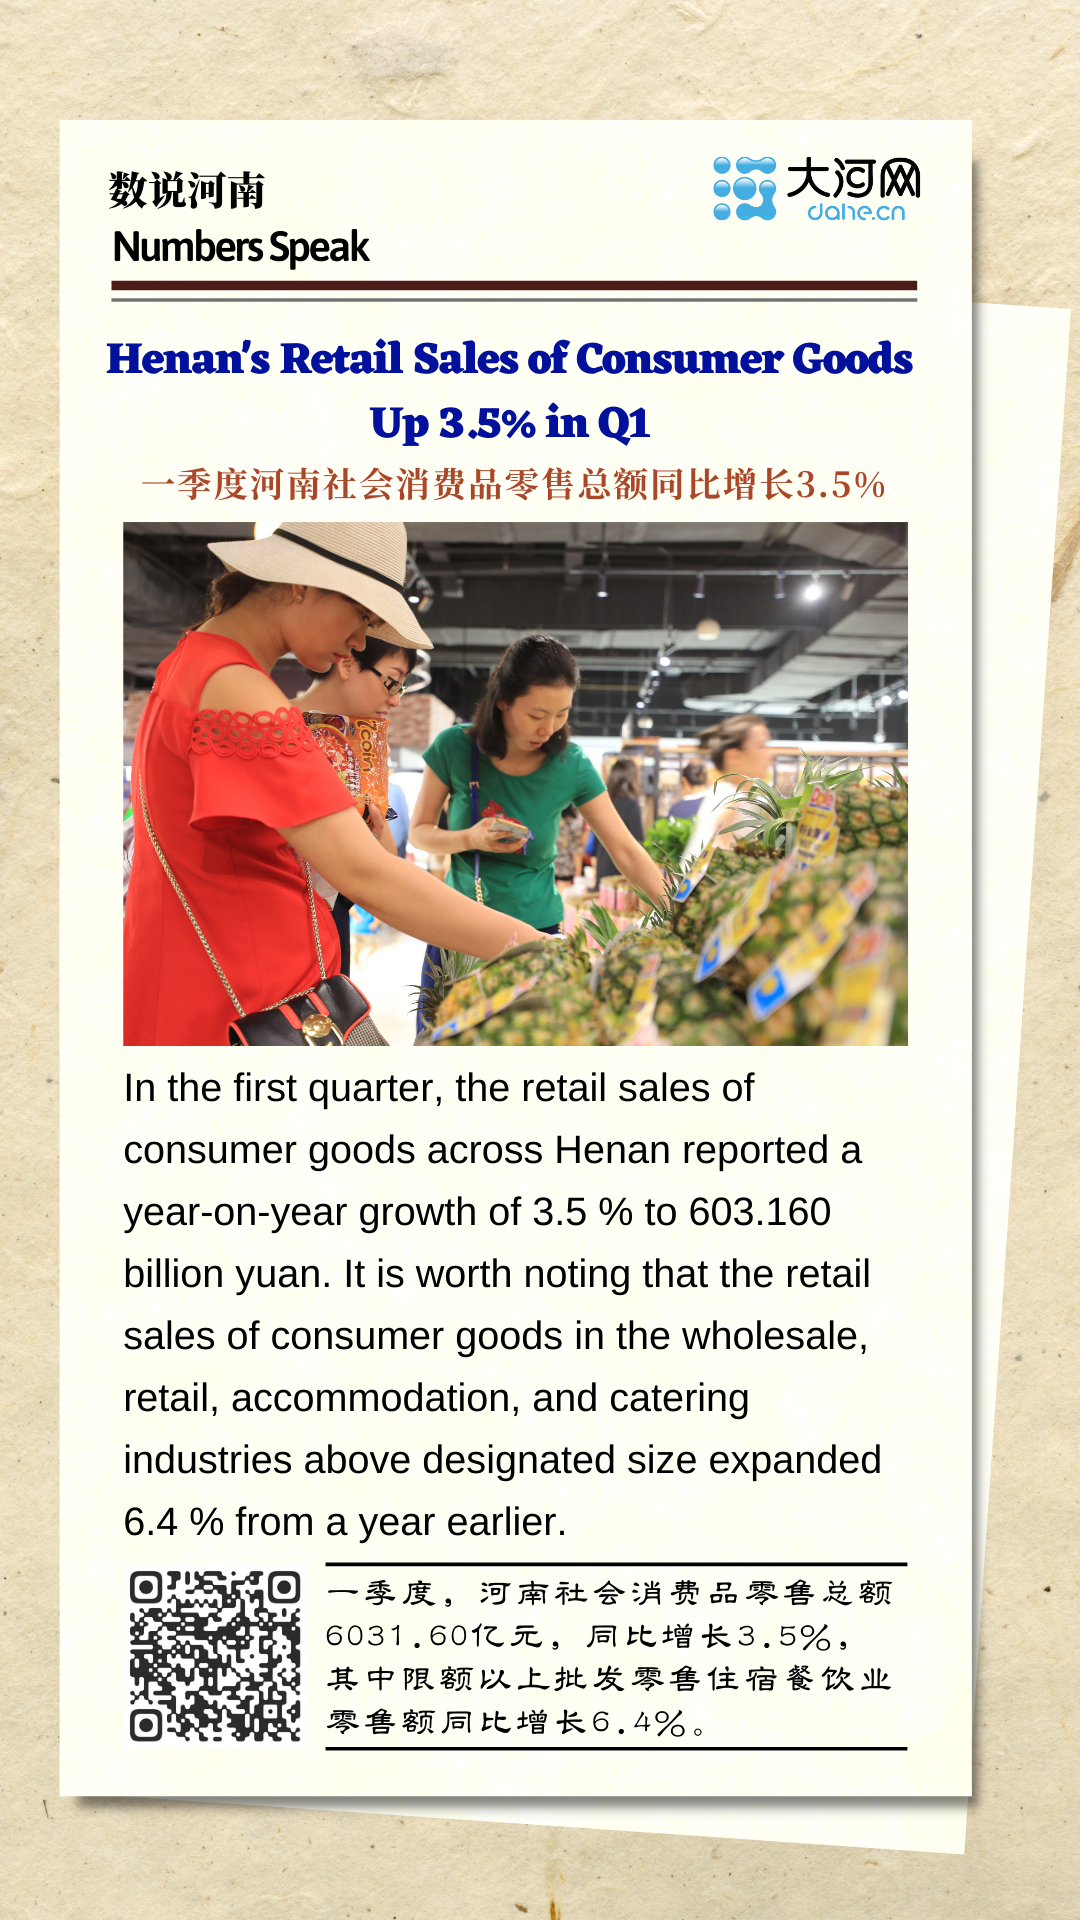 Henan's Retail Sales of Consumer Goods Up 3.5% in Q1